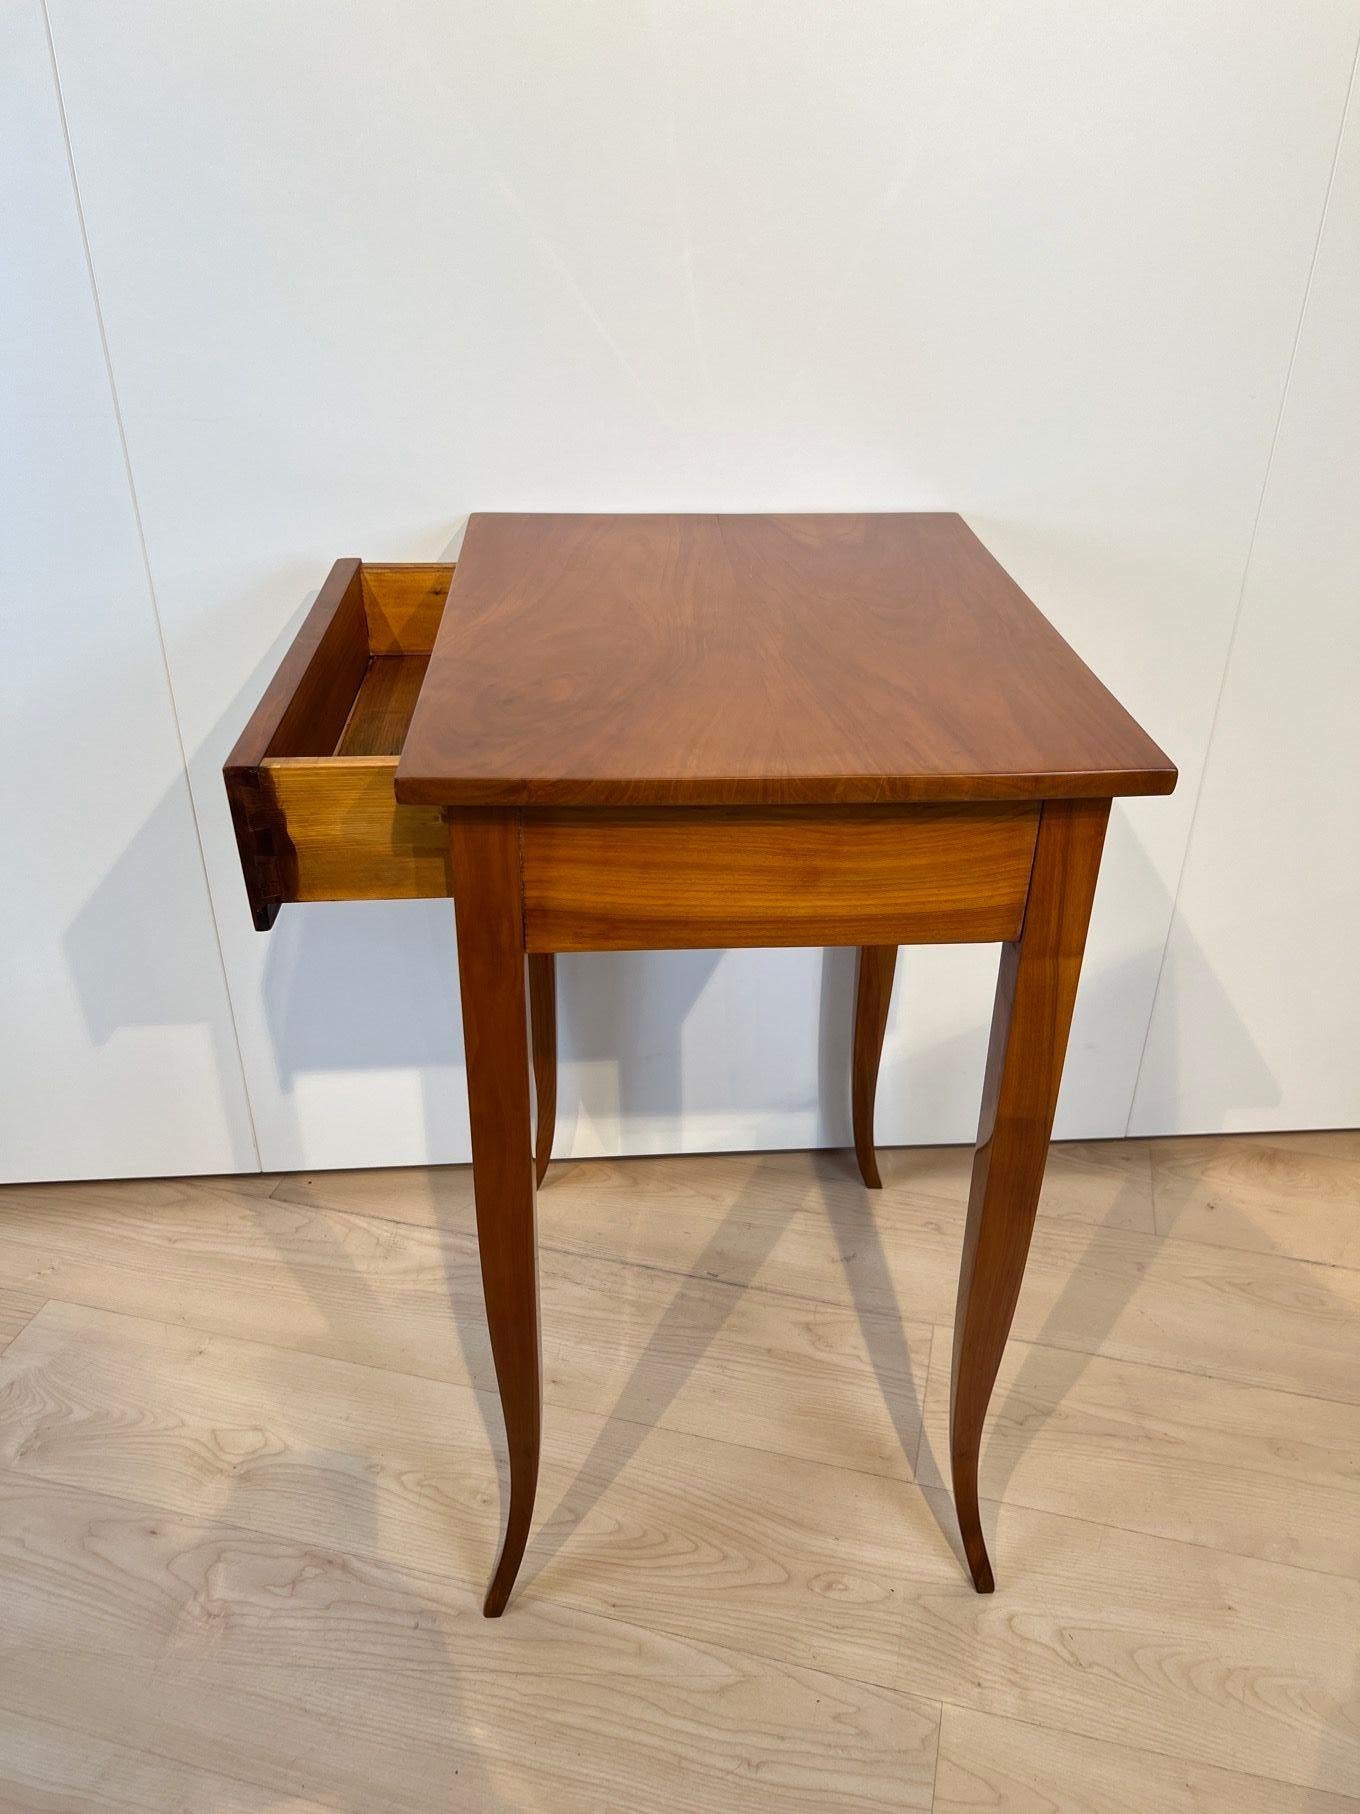 Biedermeier Side Table with Drawer, Cherry Wood, South Germany circa 1825 For Sale 13